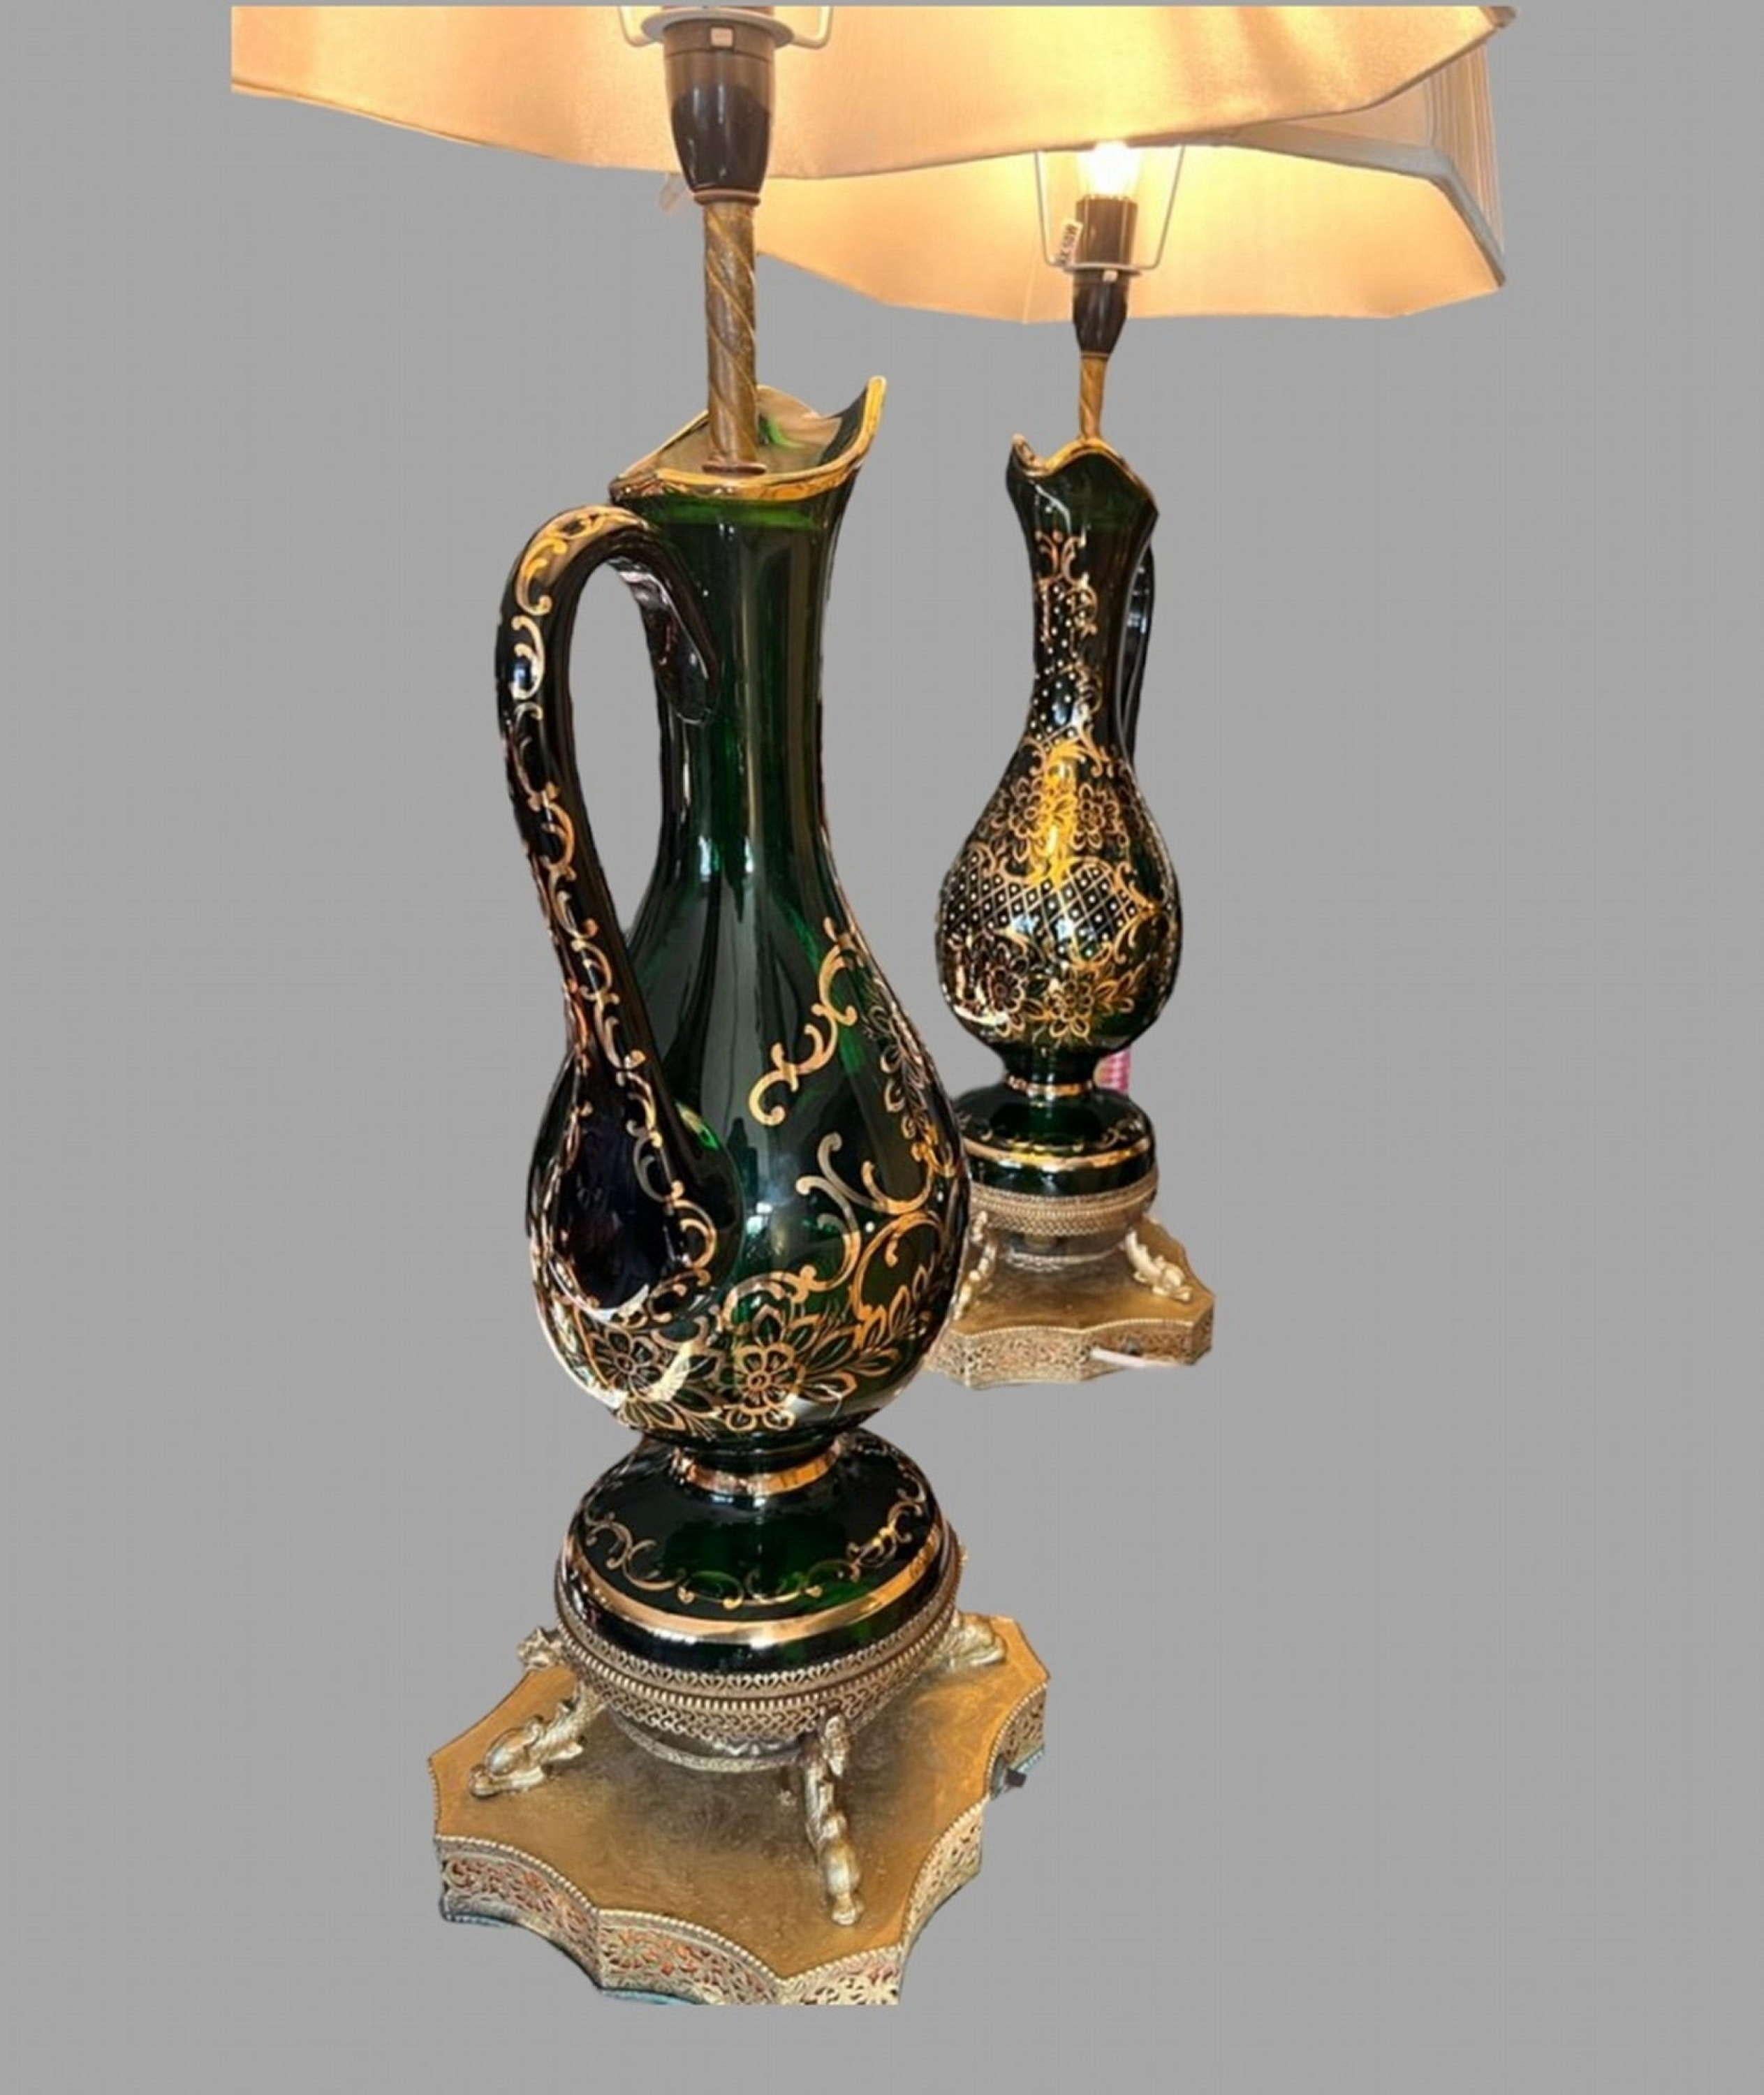 A Pair of Attractive Mid Century Bohemian Green Glass Claret Jug Lamps. Gilt pierced base with internal light. The jugs have elegant carved handles. Rewired and Pat tested. Shades not included.